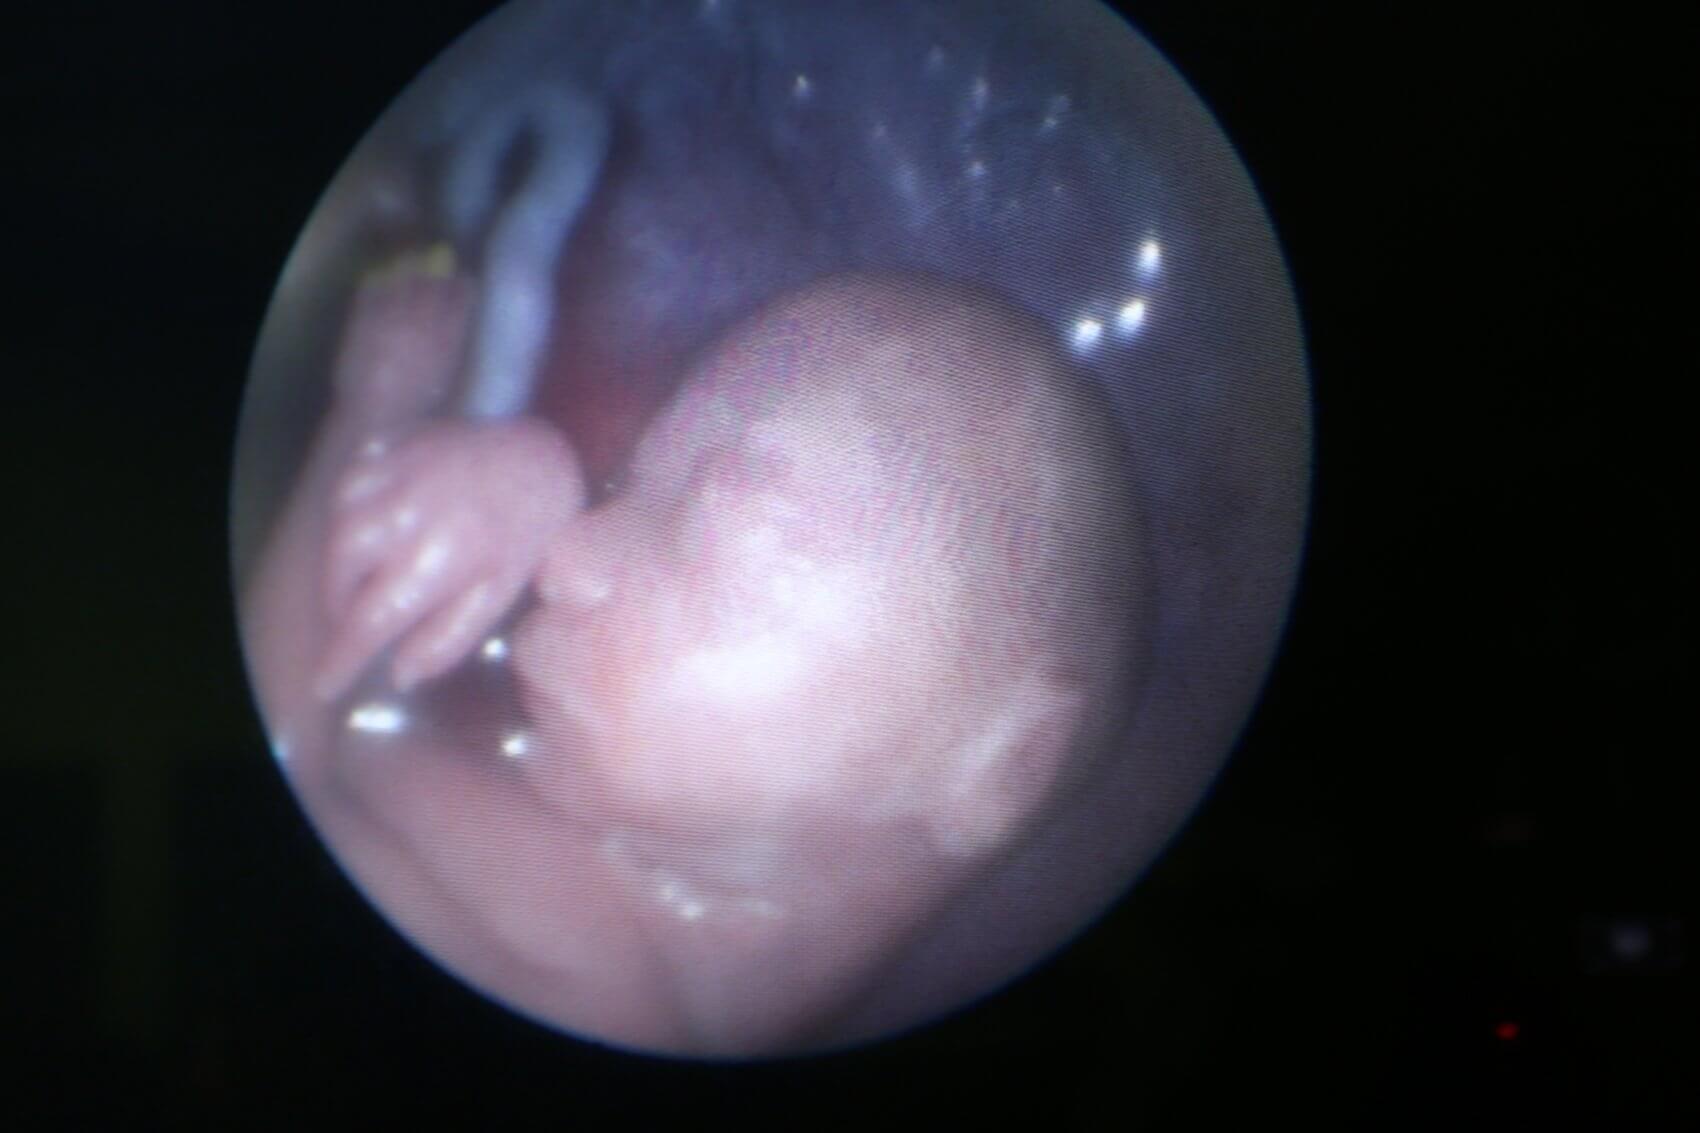 At 25 weeks gestation, utilizing an approach developed by Belfort and Whitehead, the team successfully closed the opening in Canezaro’s unborn baby’s spine.